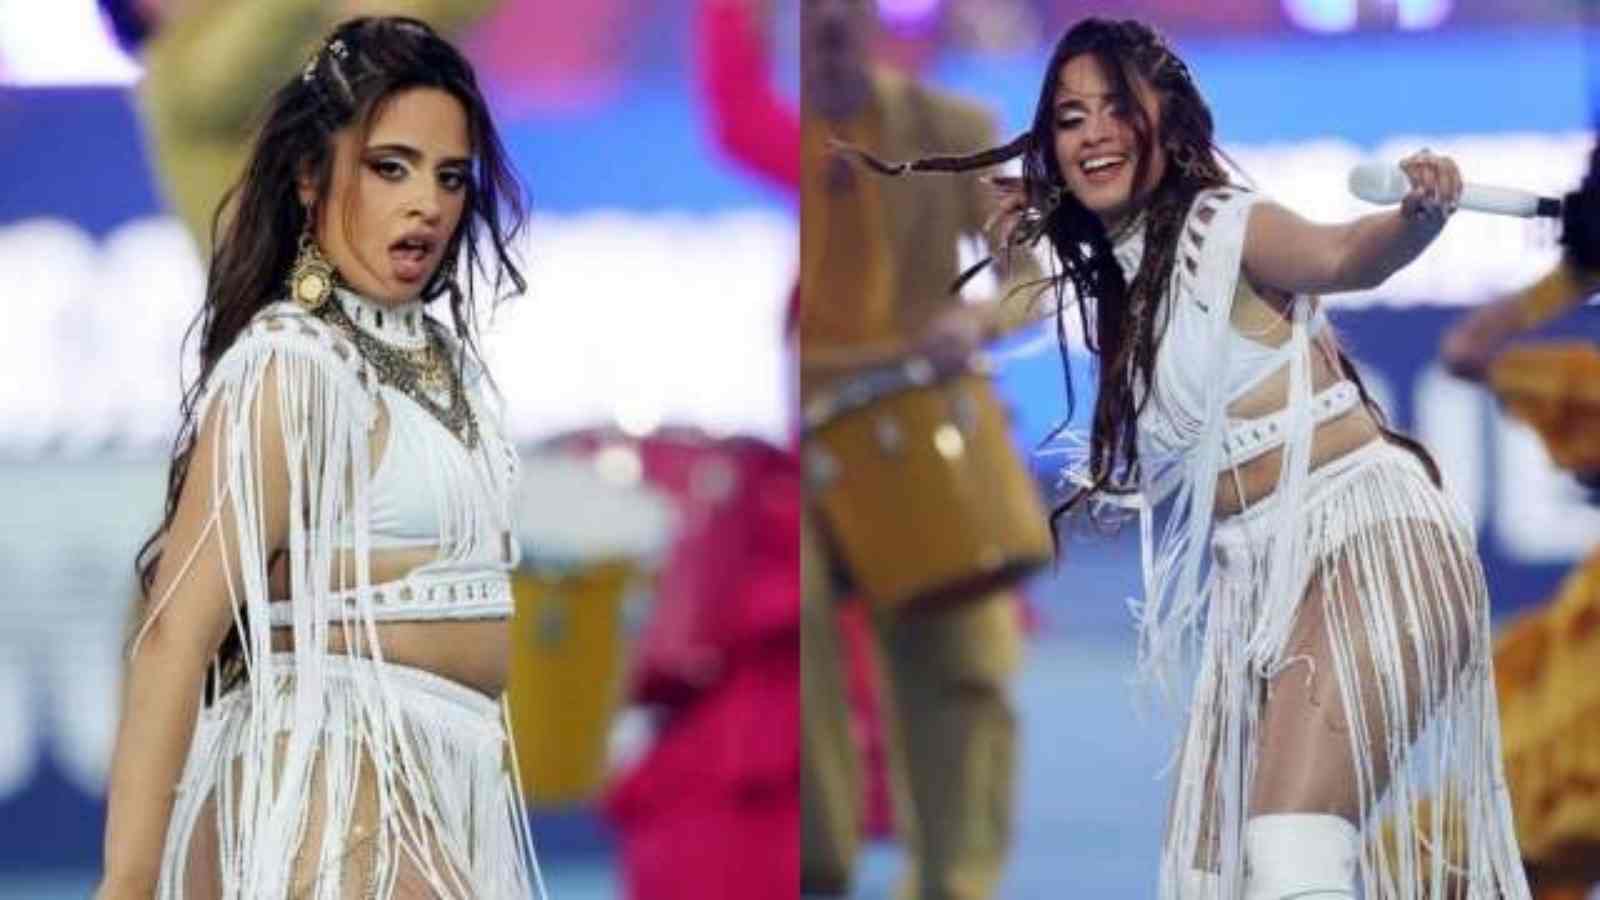 Camila Cabello, 25, looked sensational in a white fringed bikini as she put on an energetic performance at the UEFA Champions League final in Paris on Saturday